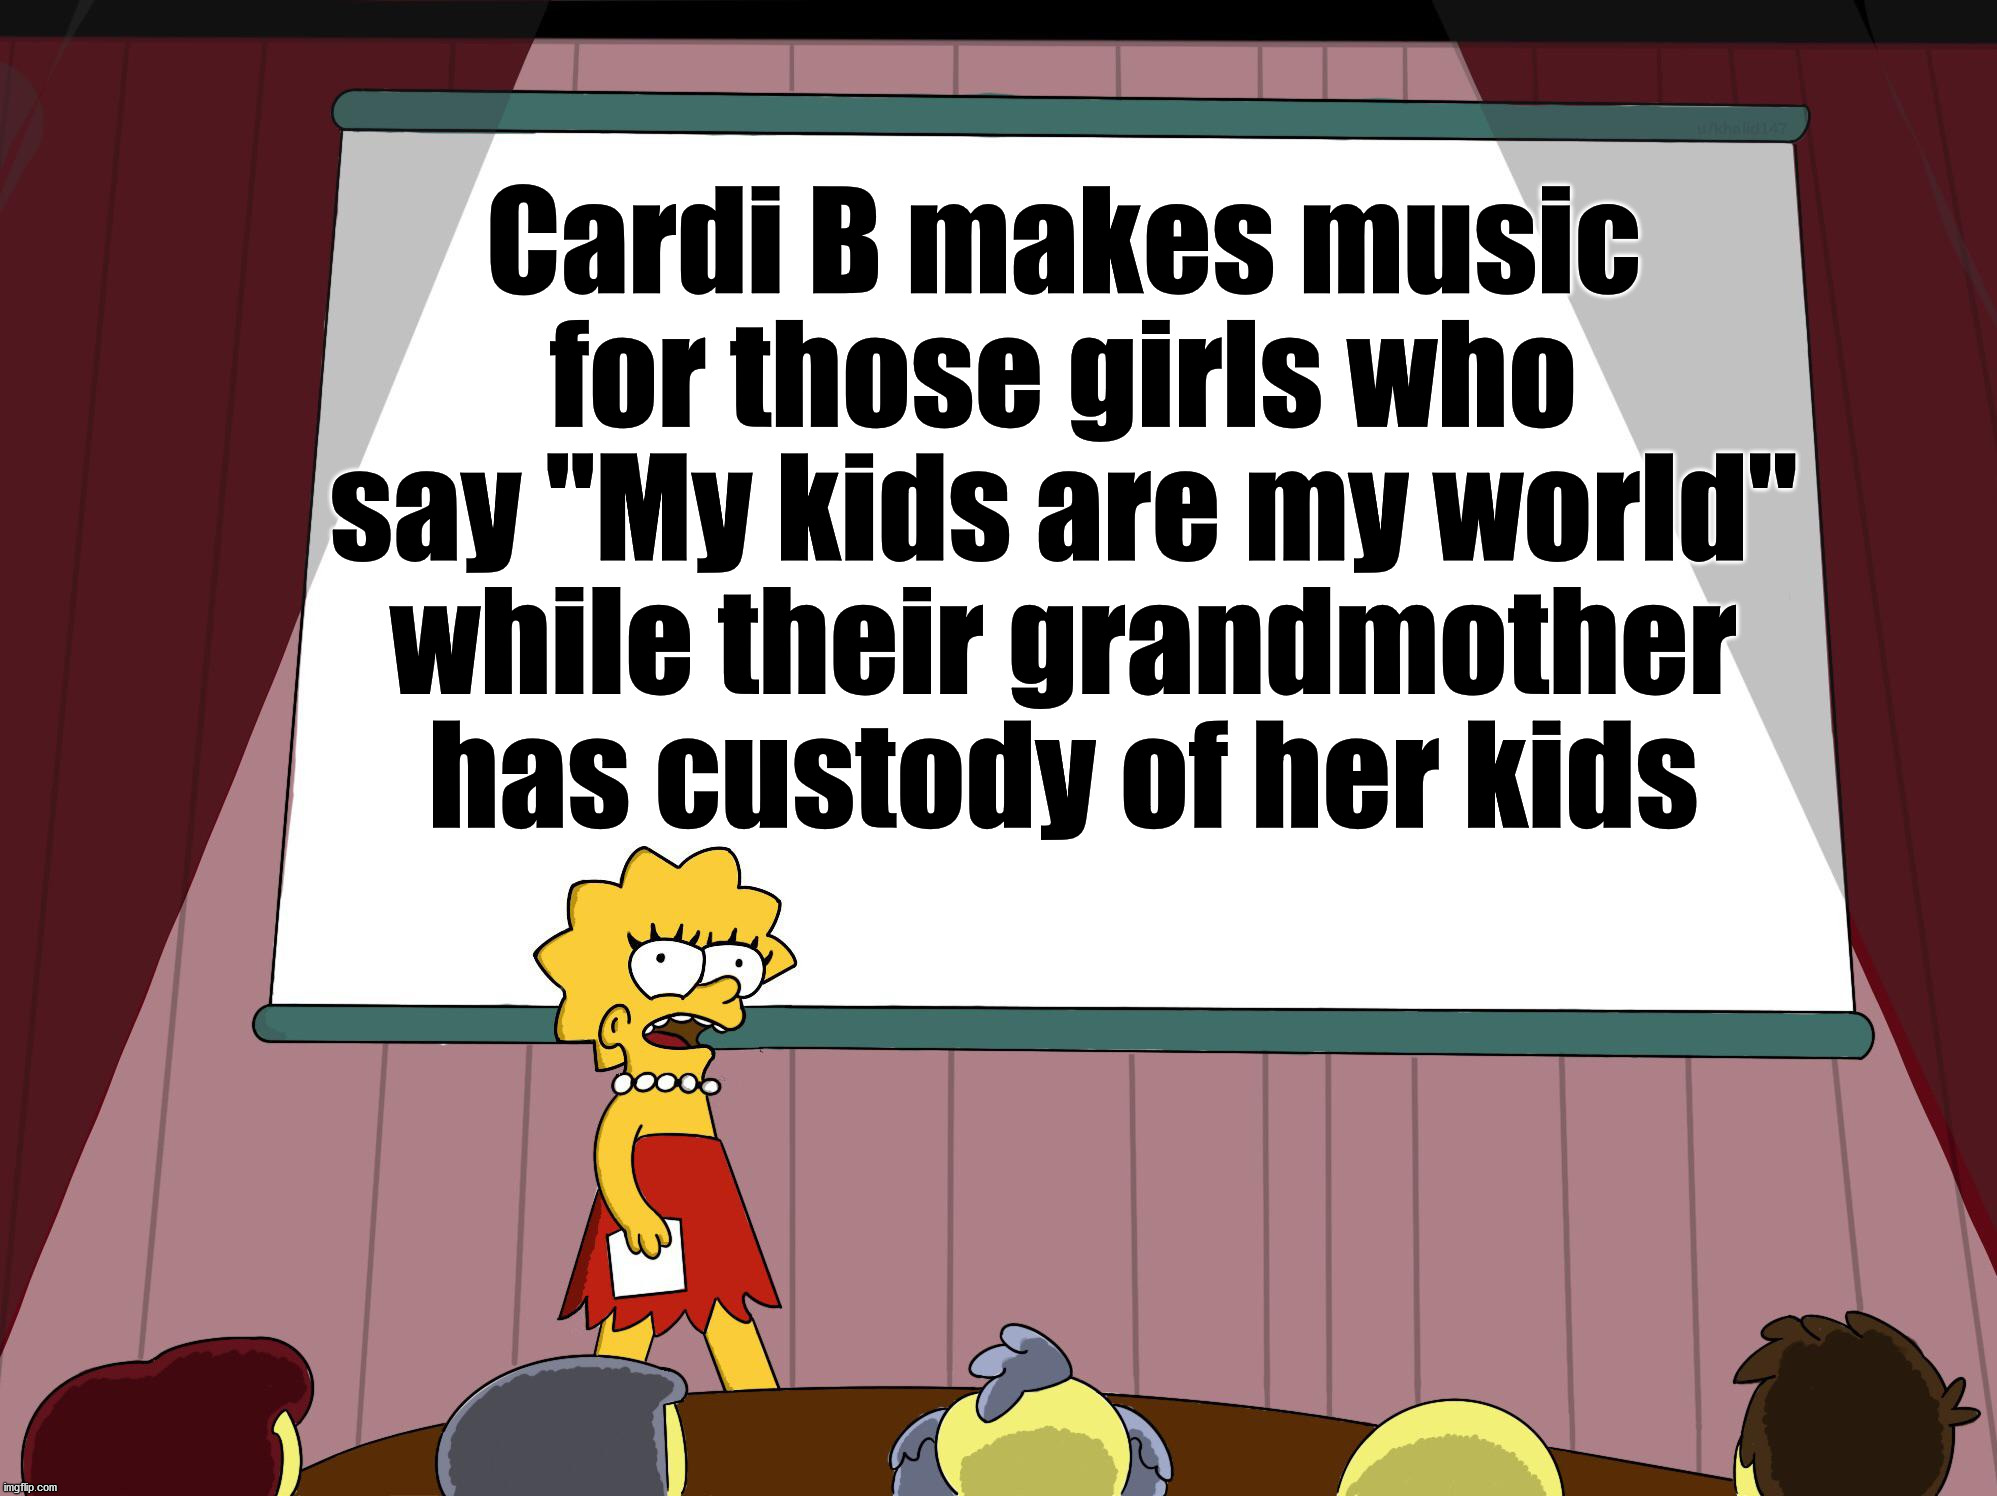 More you know about your culture. | Cardi B makes music for those girls who say "My kids are my world" while their grandmother has custody of her kids | image tagged in lisa simpson presents in hd,pop culture,cardi b,bad music | made w/ Imgflip meme maker